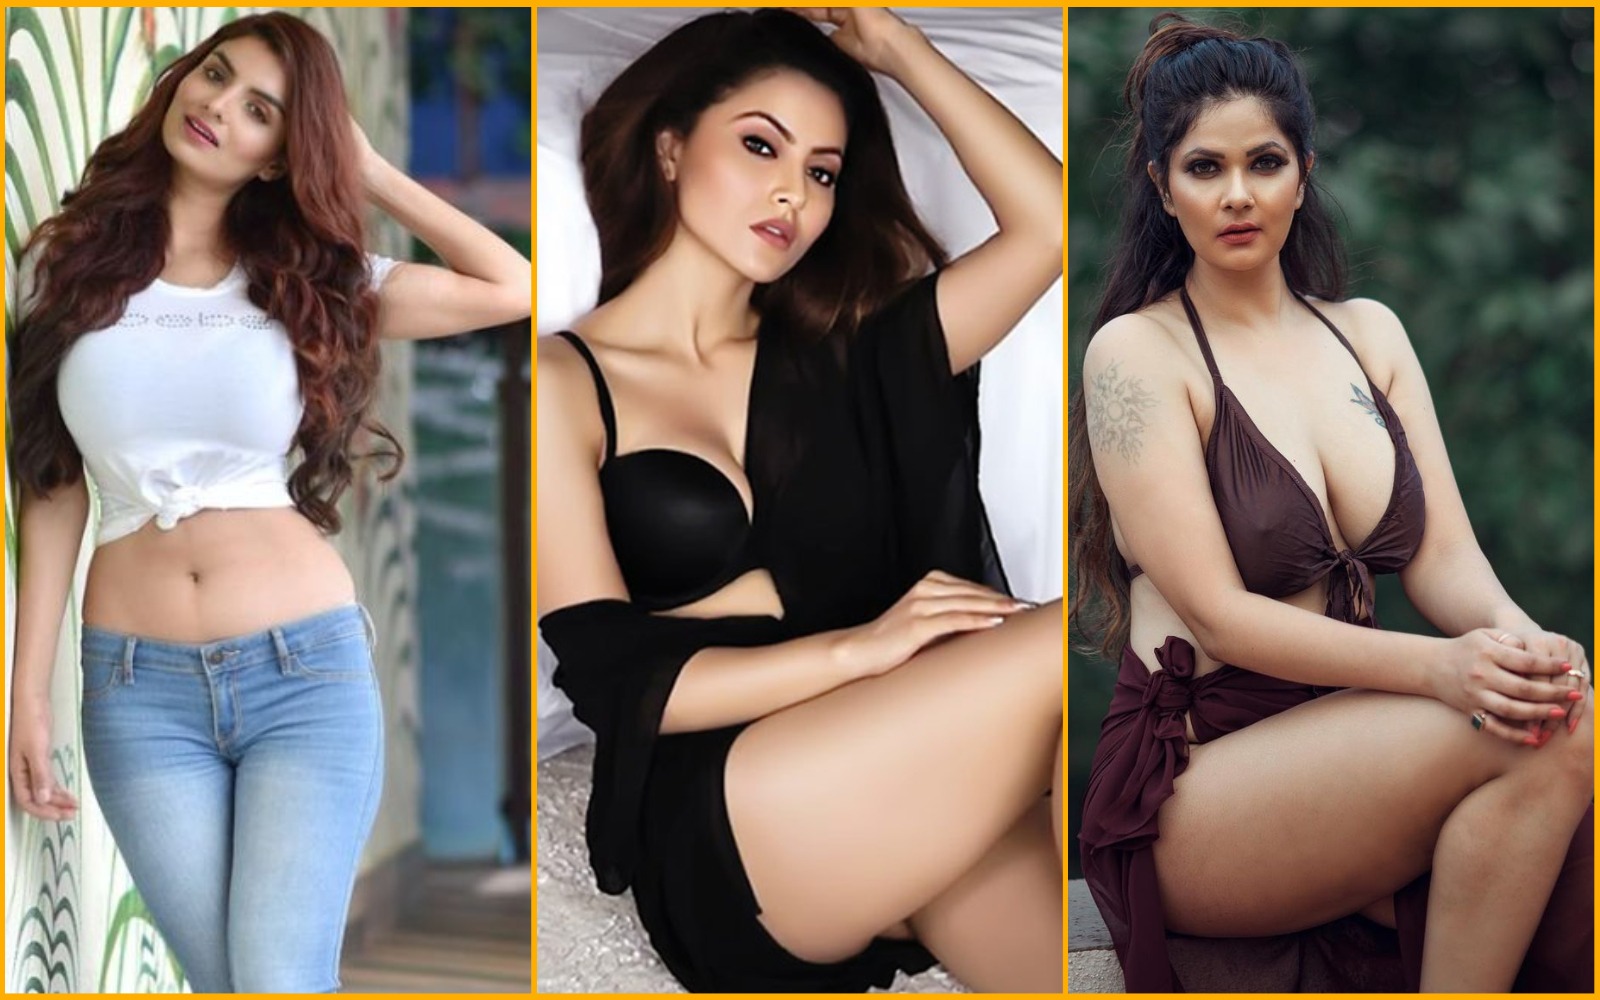 Top Sexiest Hottest Indian Models In Top About